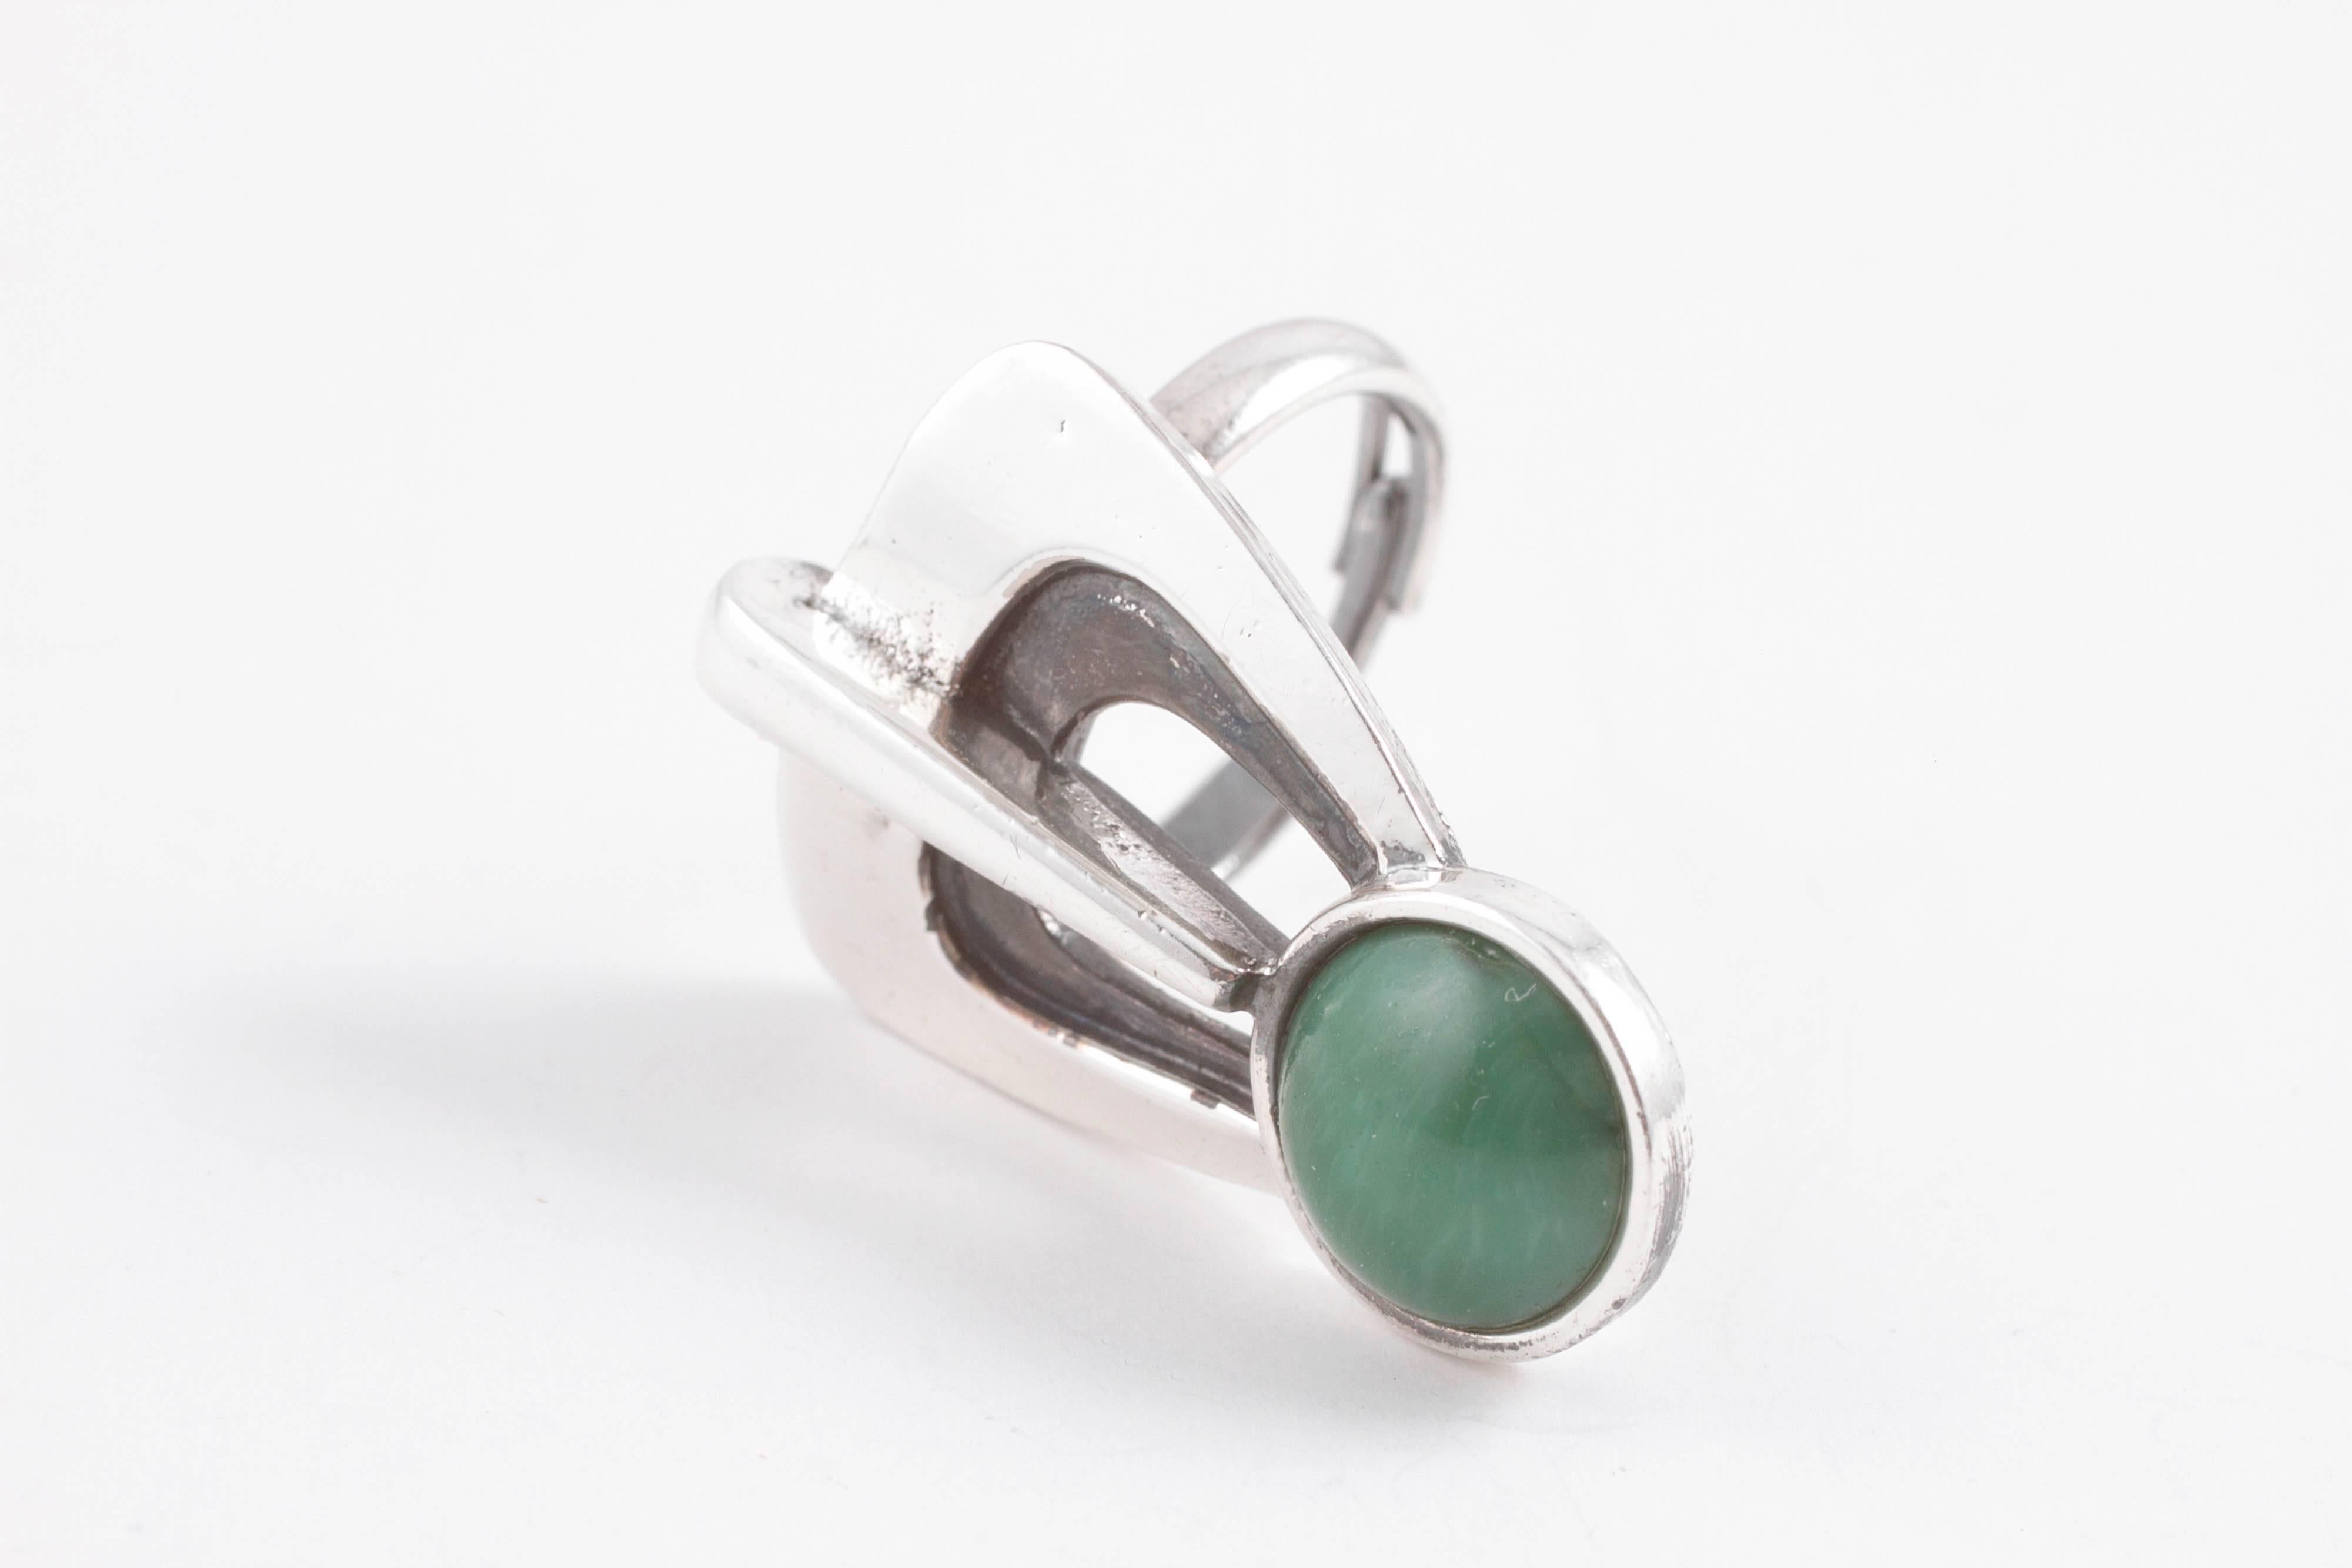 Mid-Century Modern design in silver with green glass simulating malachite gemstone.  A great ring and a bold design.  Size 7